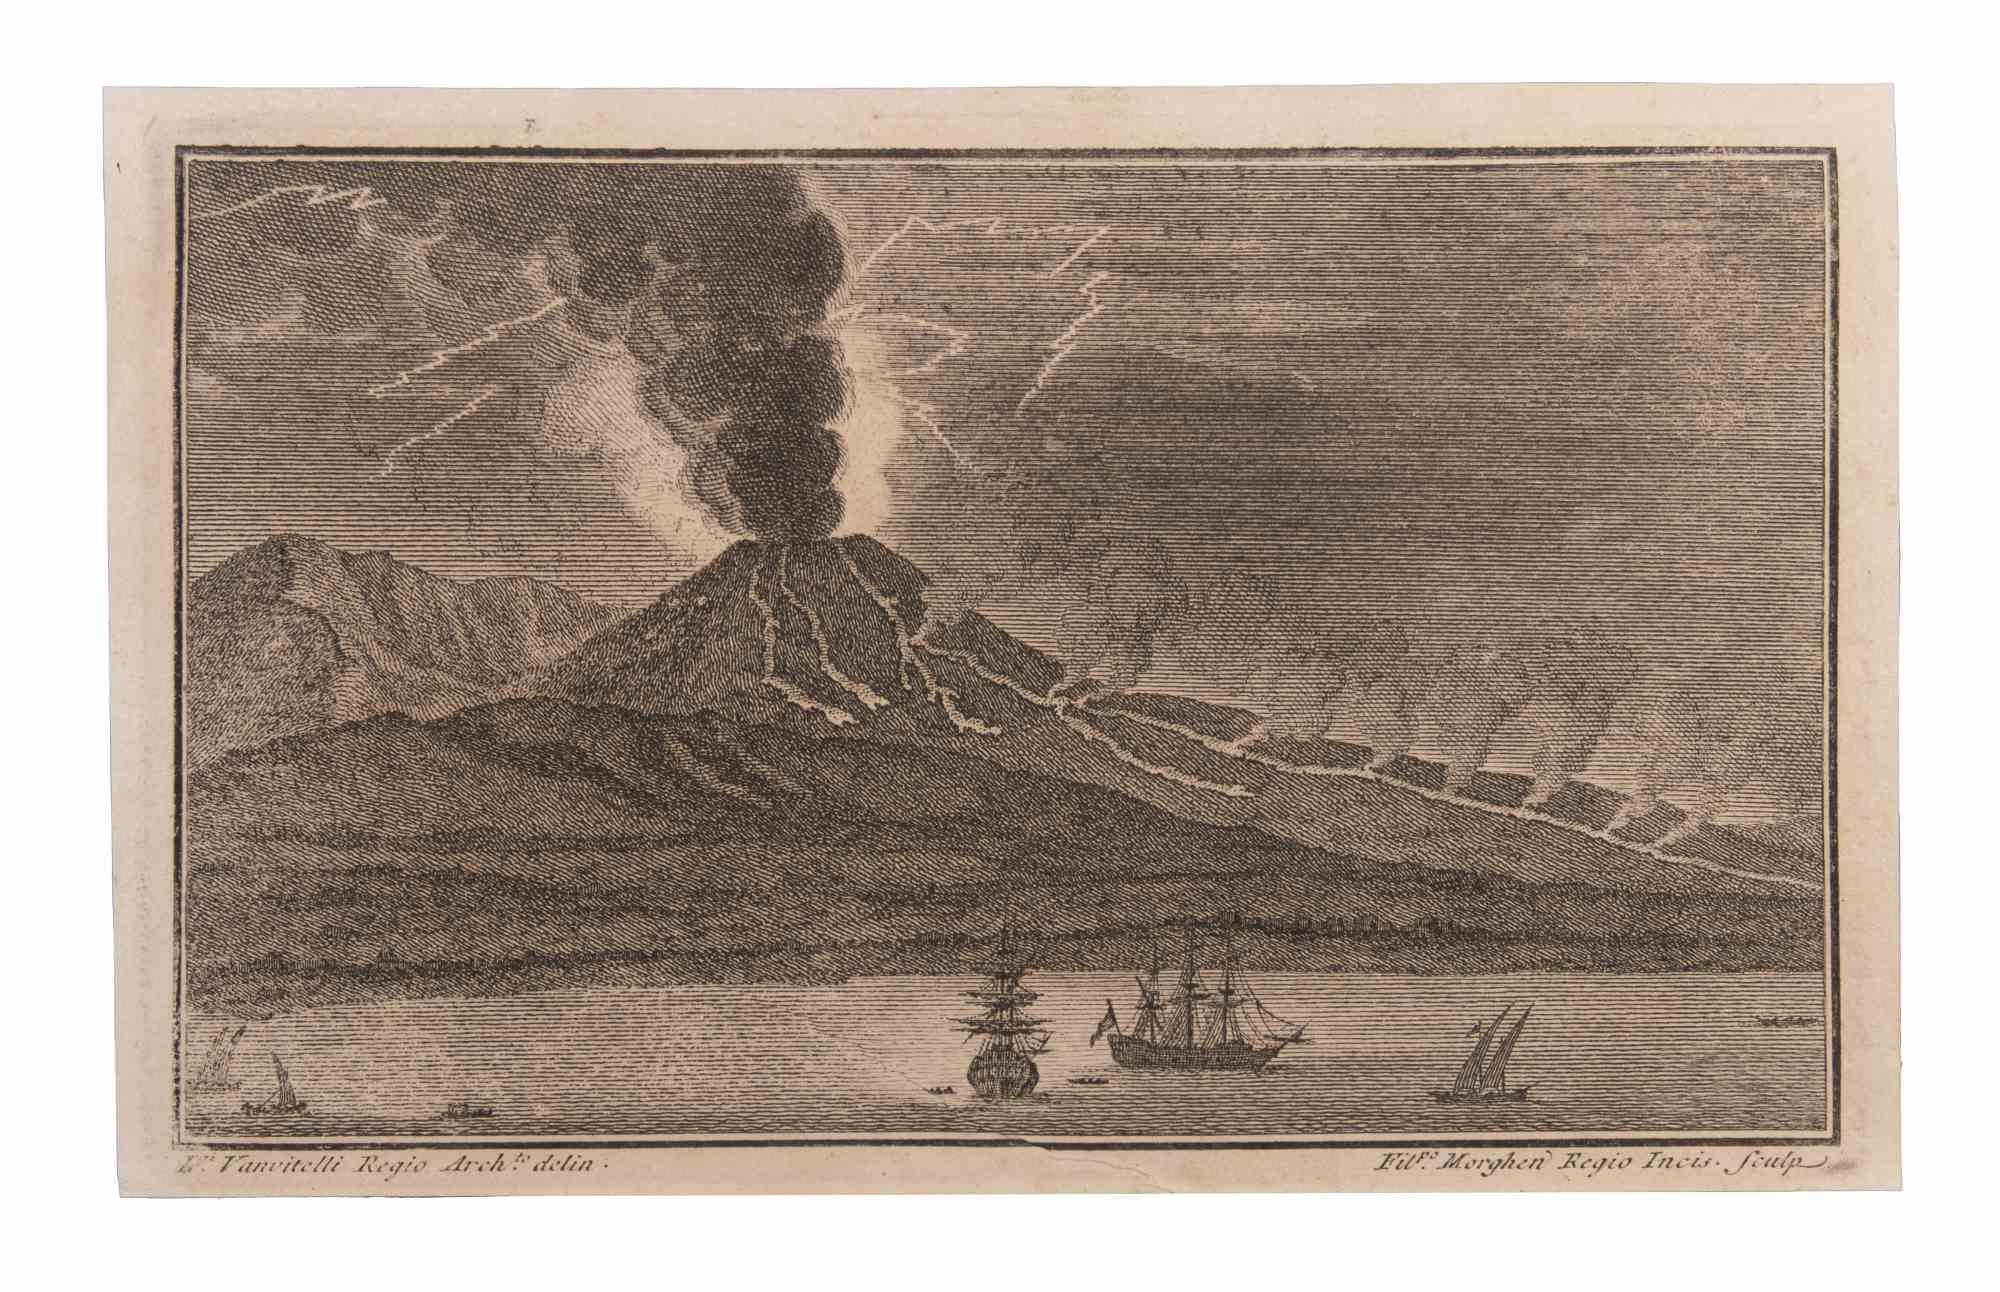 Seascape With Vesuvio and Boats is an Etching realized by  Filippo Morghen (1730-1807).

The etching belongs to the print suite “Antiquities of Herculaneum Exposed” (original title: “Le Antichità di Ercolano Esposte”), an eight-volume volume of